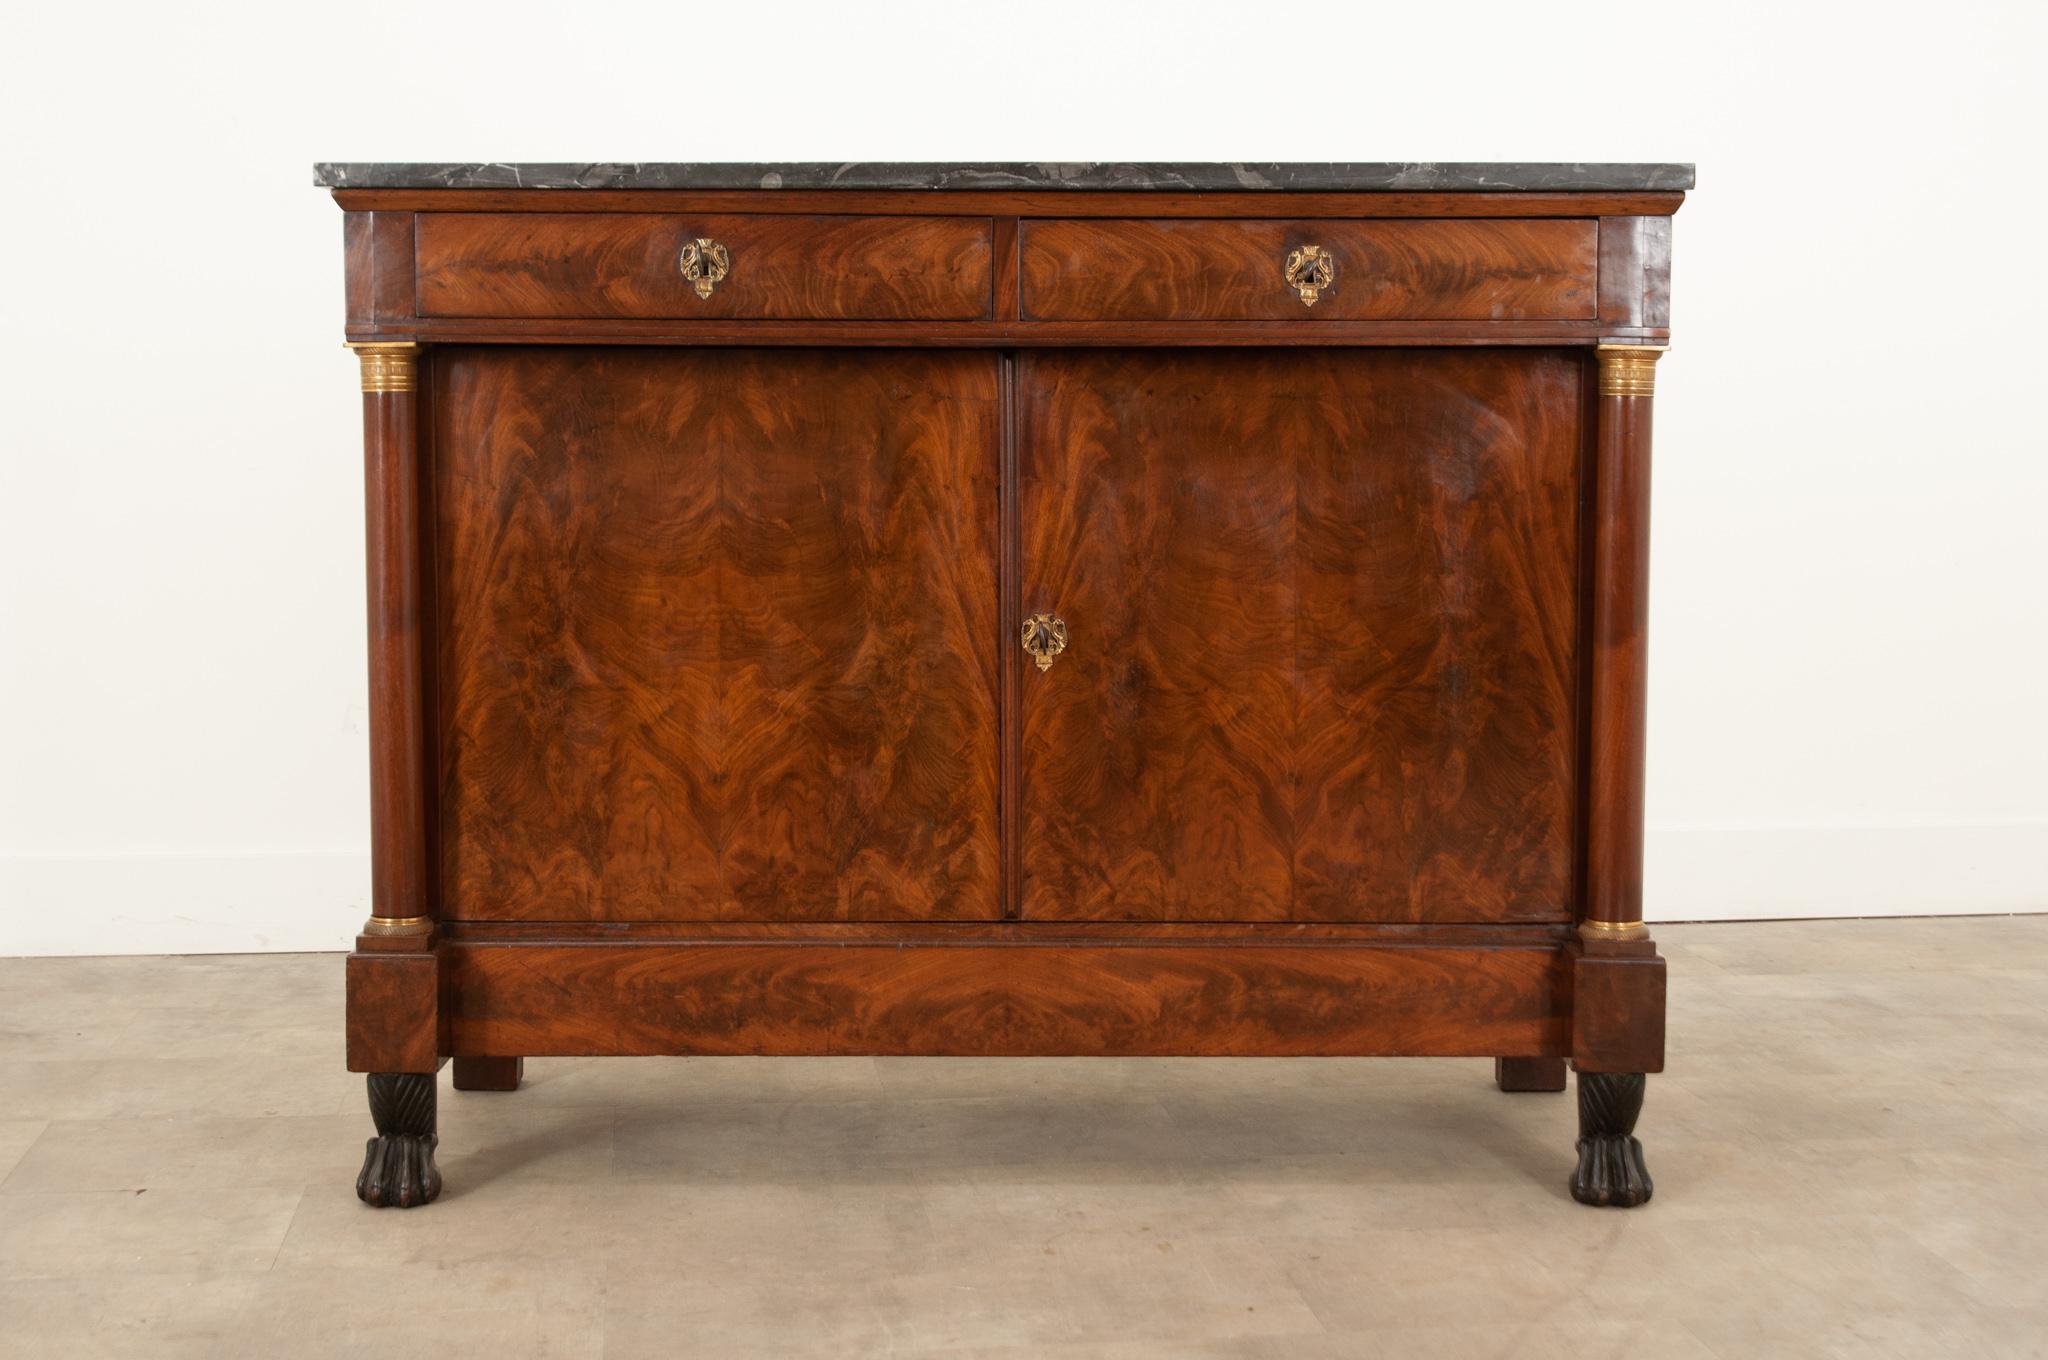 A French Empire buffet hand-crafted in France in the 19th century that features fabulous mahogany burl wood and neoclassical details. The original marble top is stunning with gorgeous dramatic patterns in the stone. The apron houses two drawers